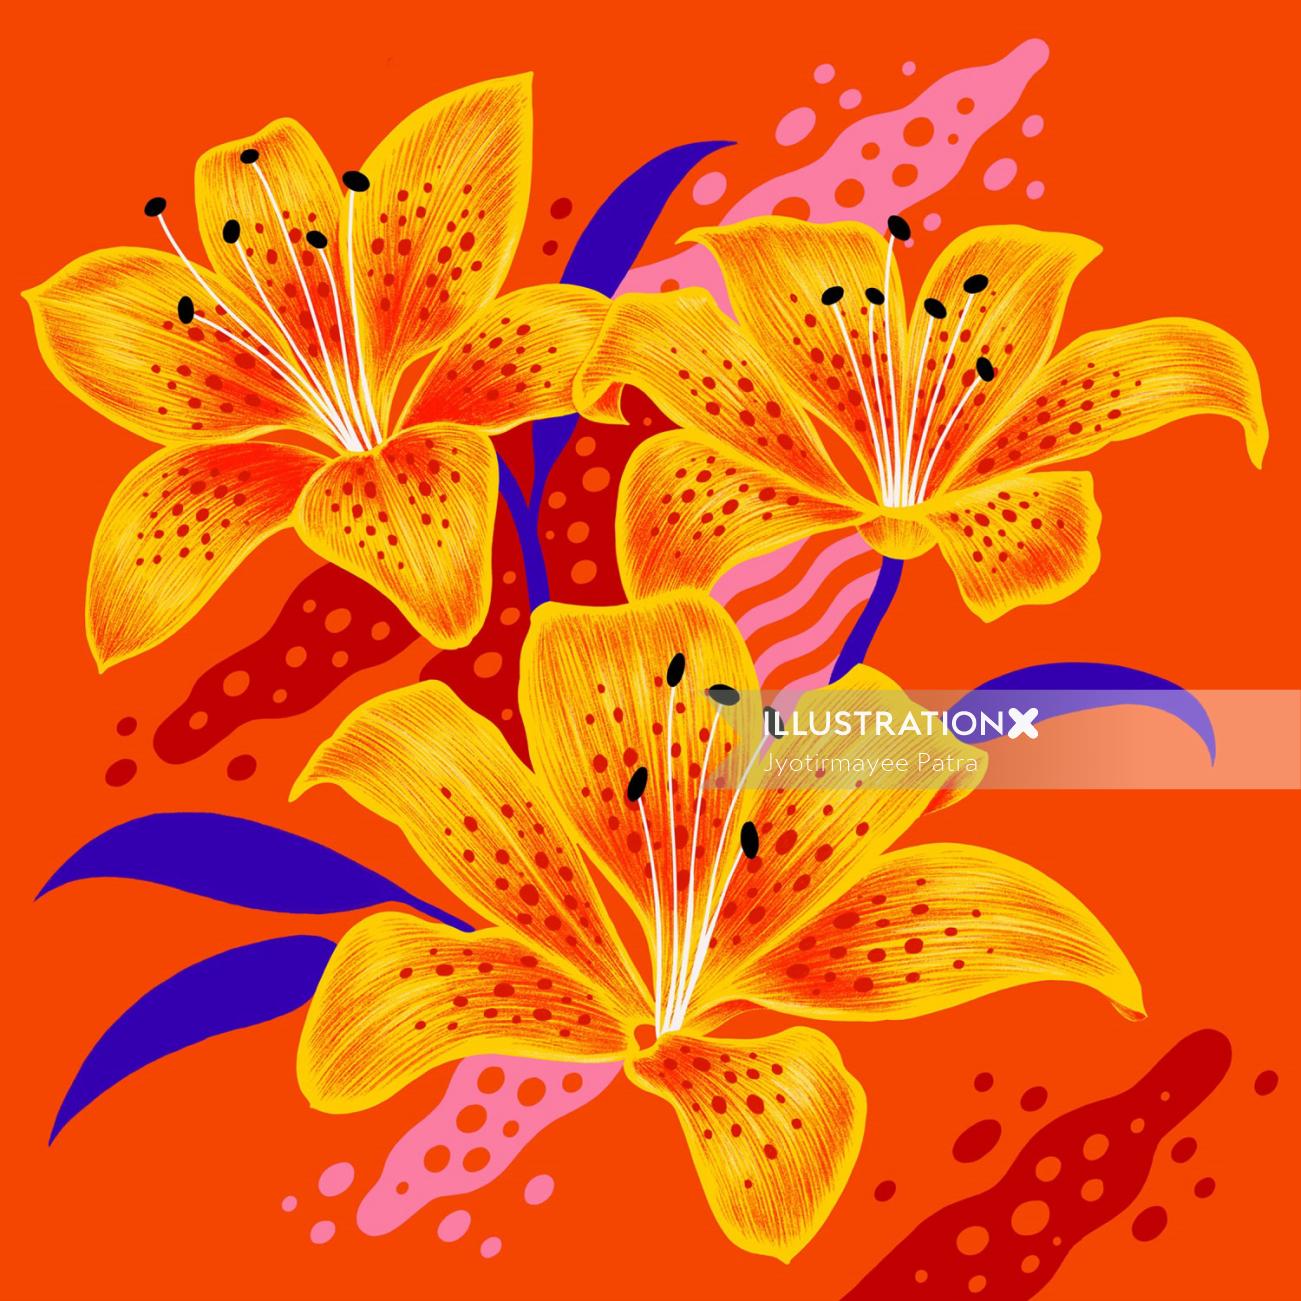 Tigerlily flowers with vibrant colours & graphic textures.